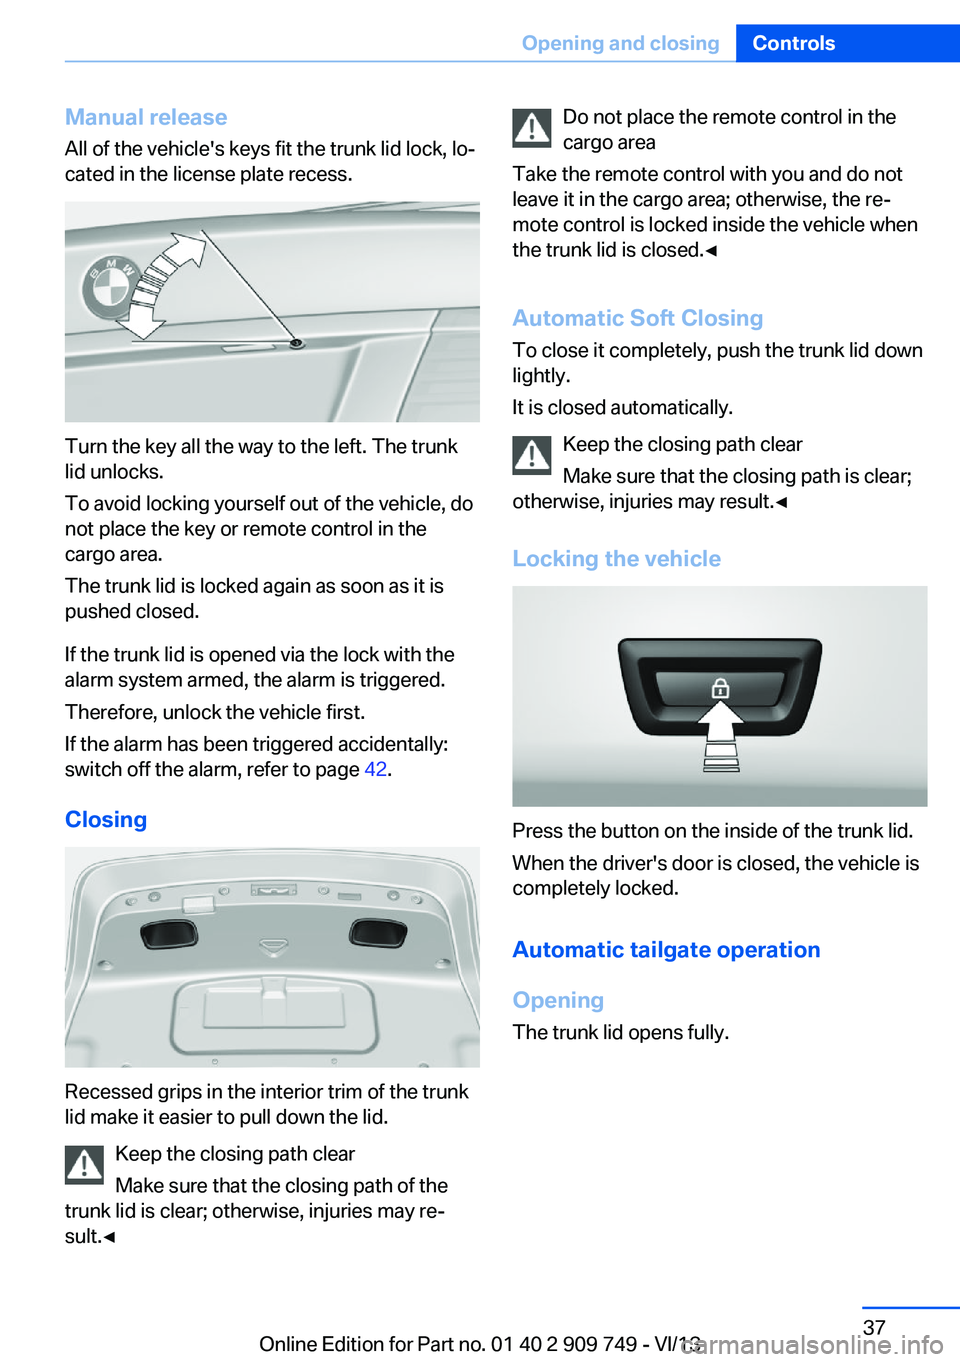 BMW 740I 2014 Owners Guide Manual release
All of the vehicle's keys fit the trunk lid lock, lo‐
cated in the license plate recess.
Turn the key all the way to the left. The trunk
lid unlocks.
To avoid locking yourself out